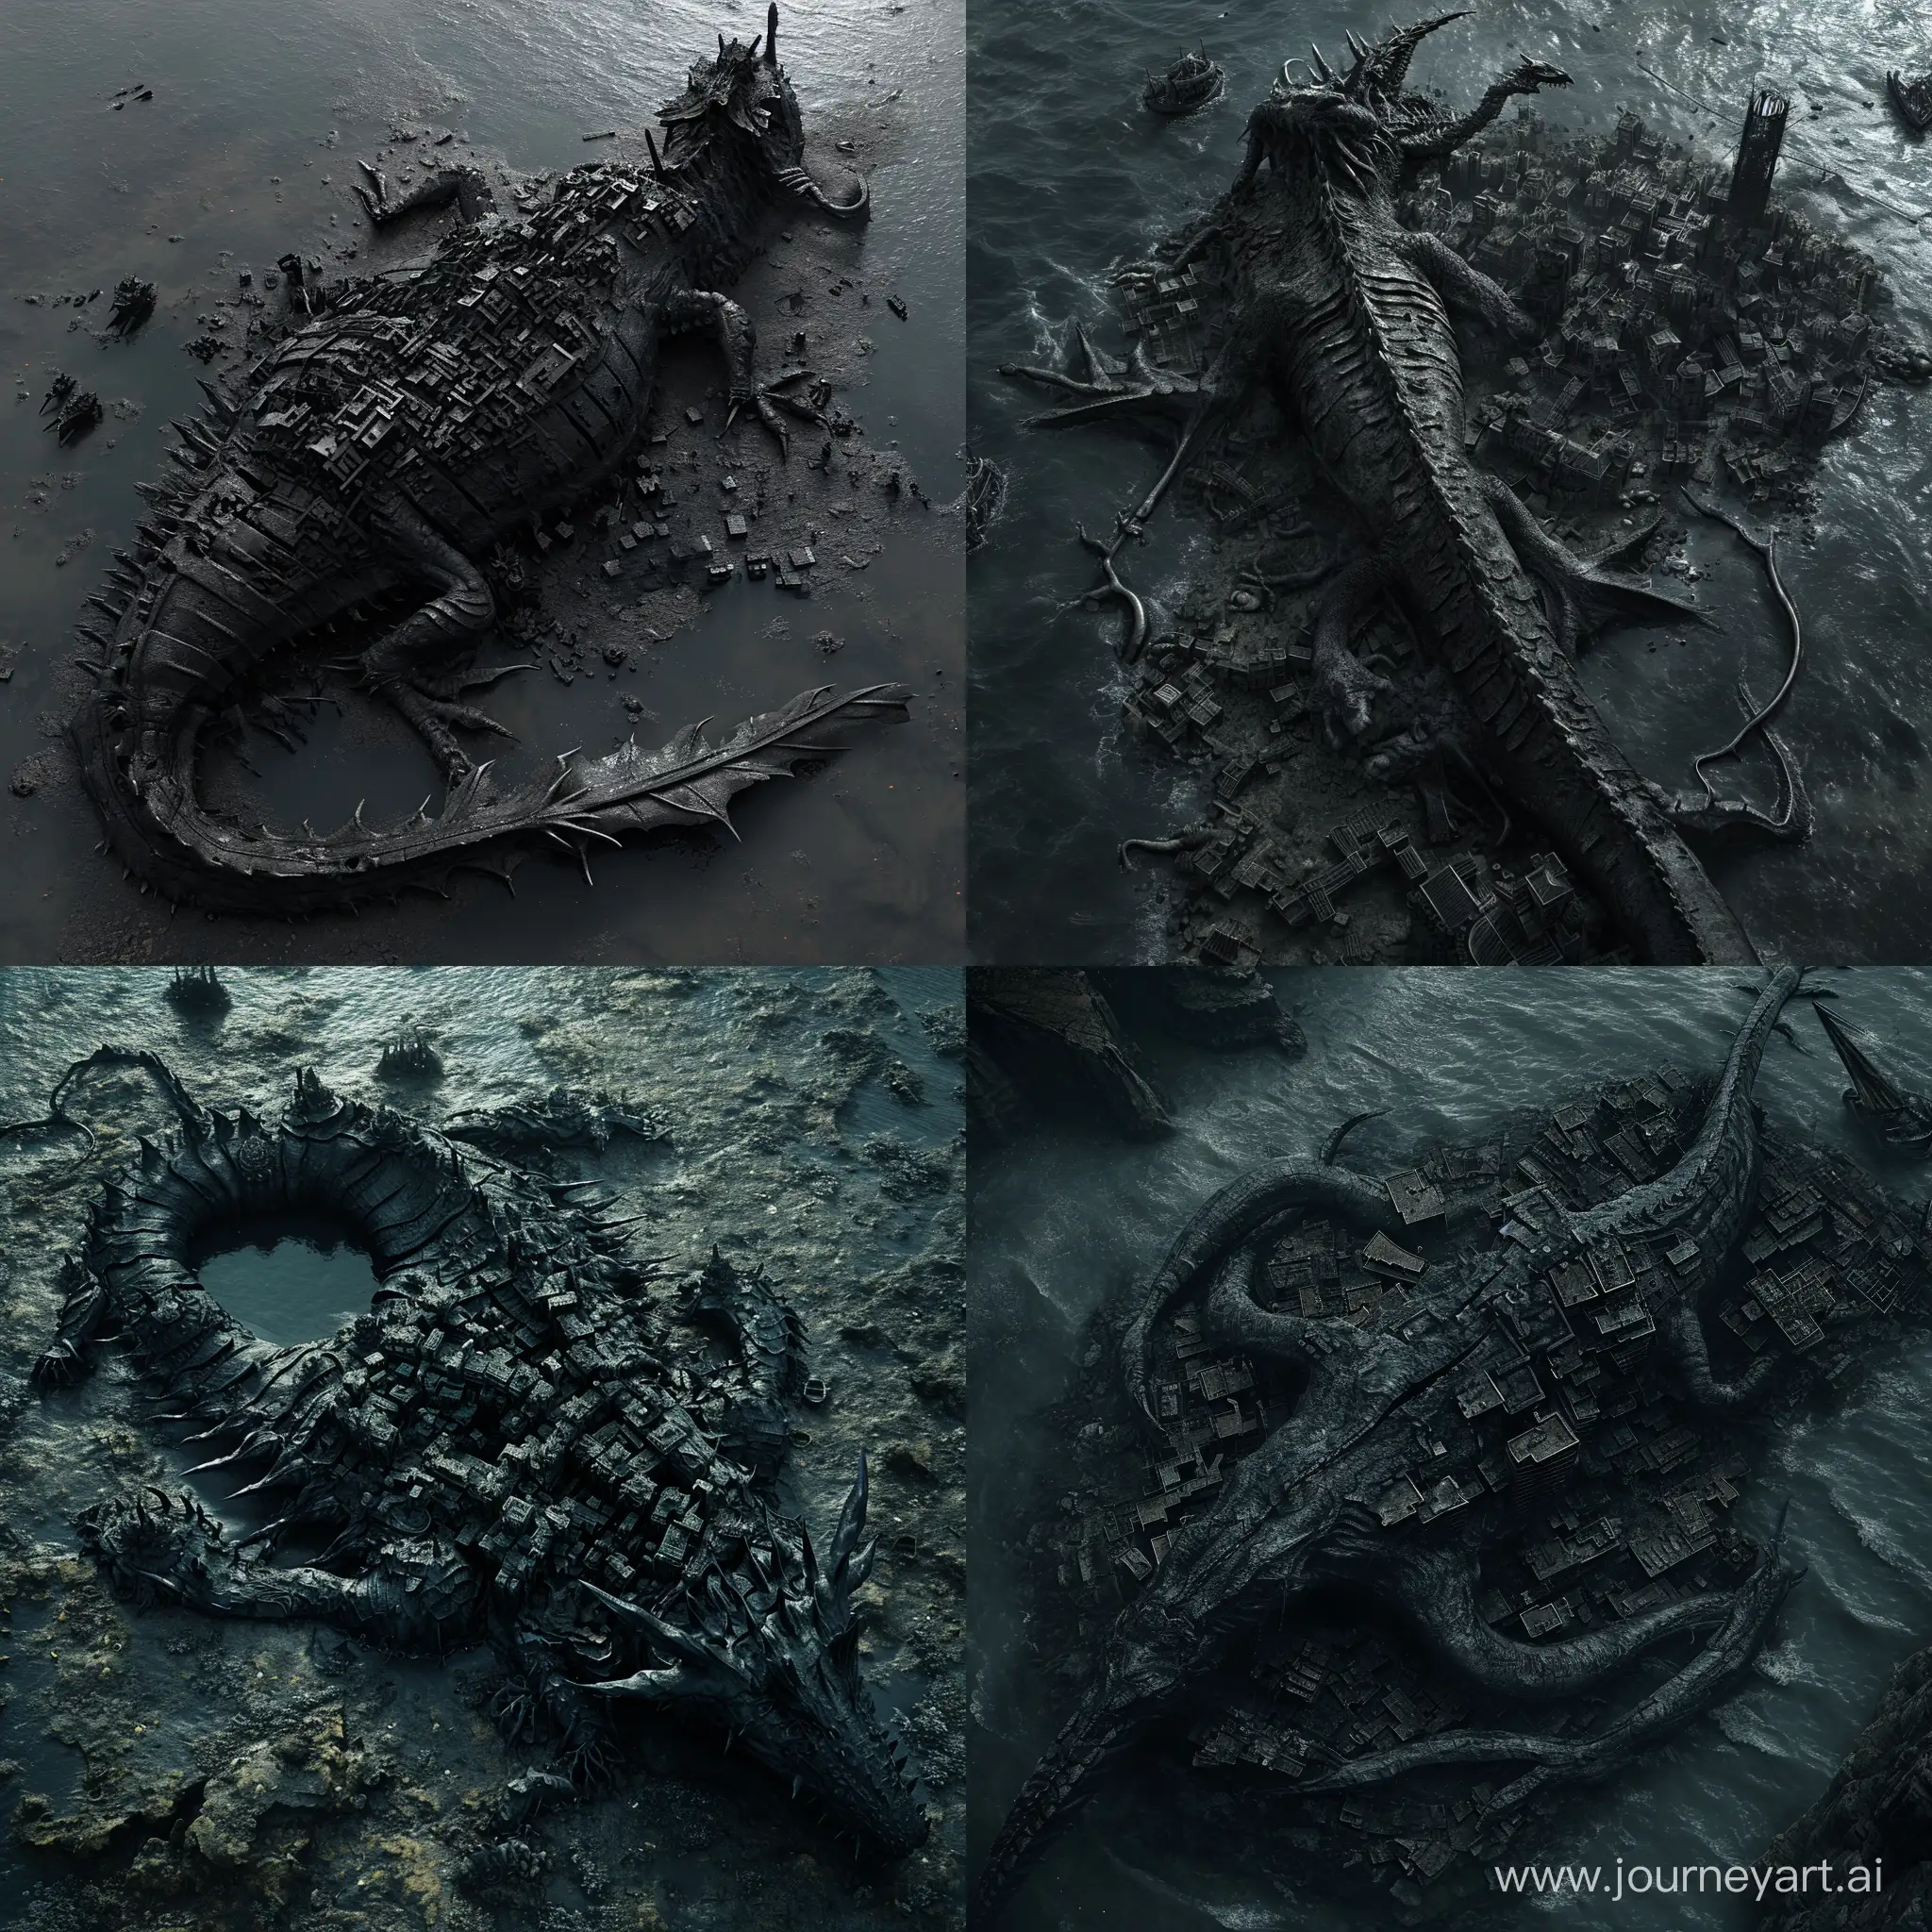 The corpse of a giant dragon entrenched on the ocean floor that has become a city, black, inhabited by serpentine anthropomorphic creatures, top view, photorealistic, gloomy setting